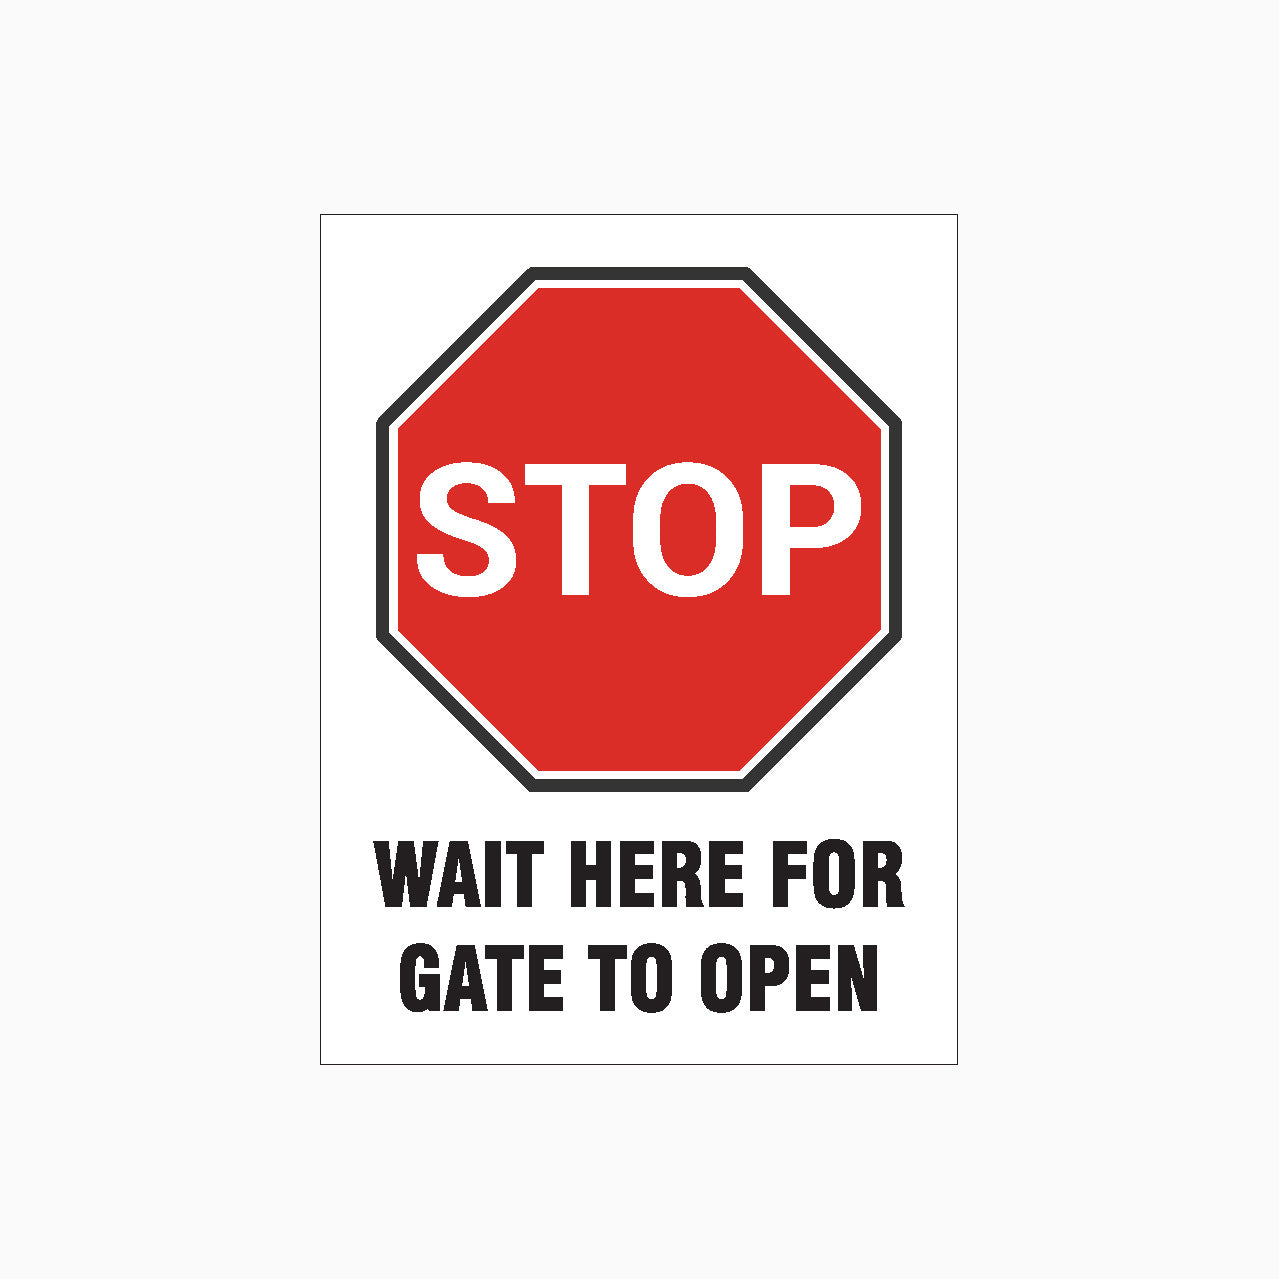 STOP WAIT HERE FOR GATE TO OPEN SIGN